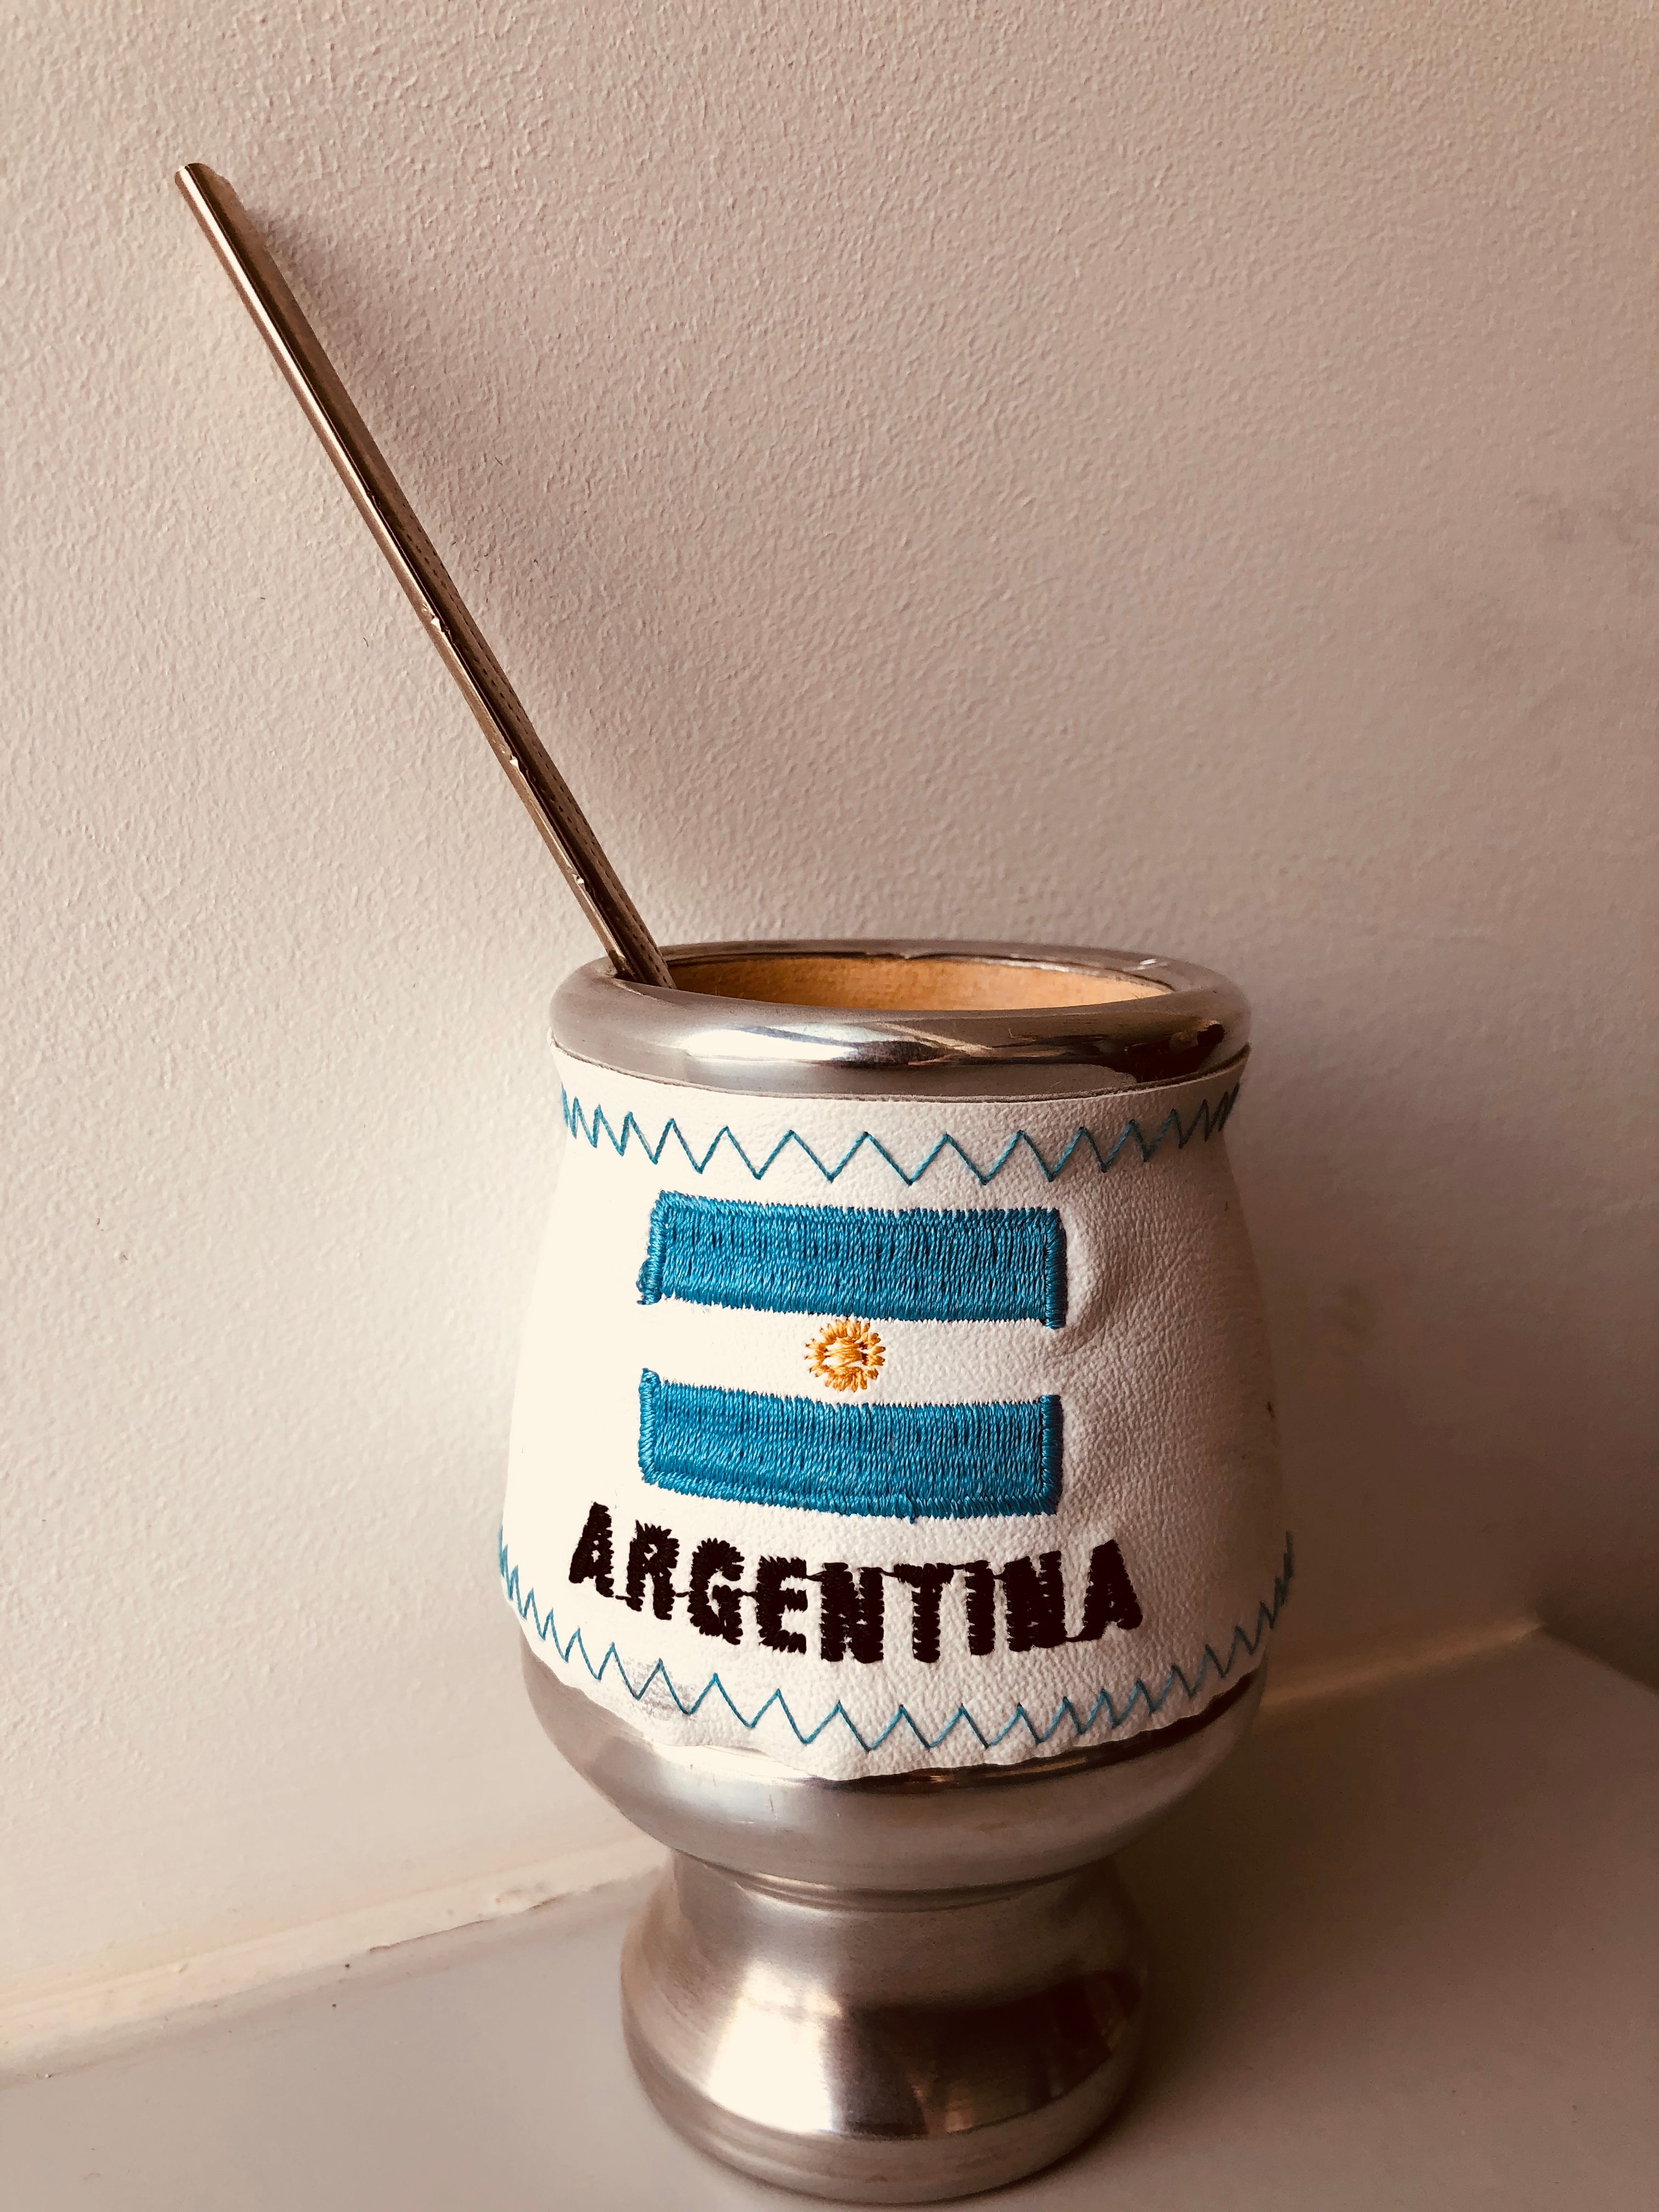 The ritual of mate in Argentina: Don't say thank you (unless you're done)